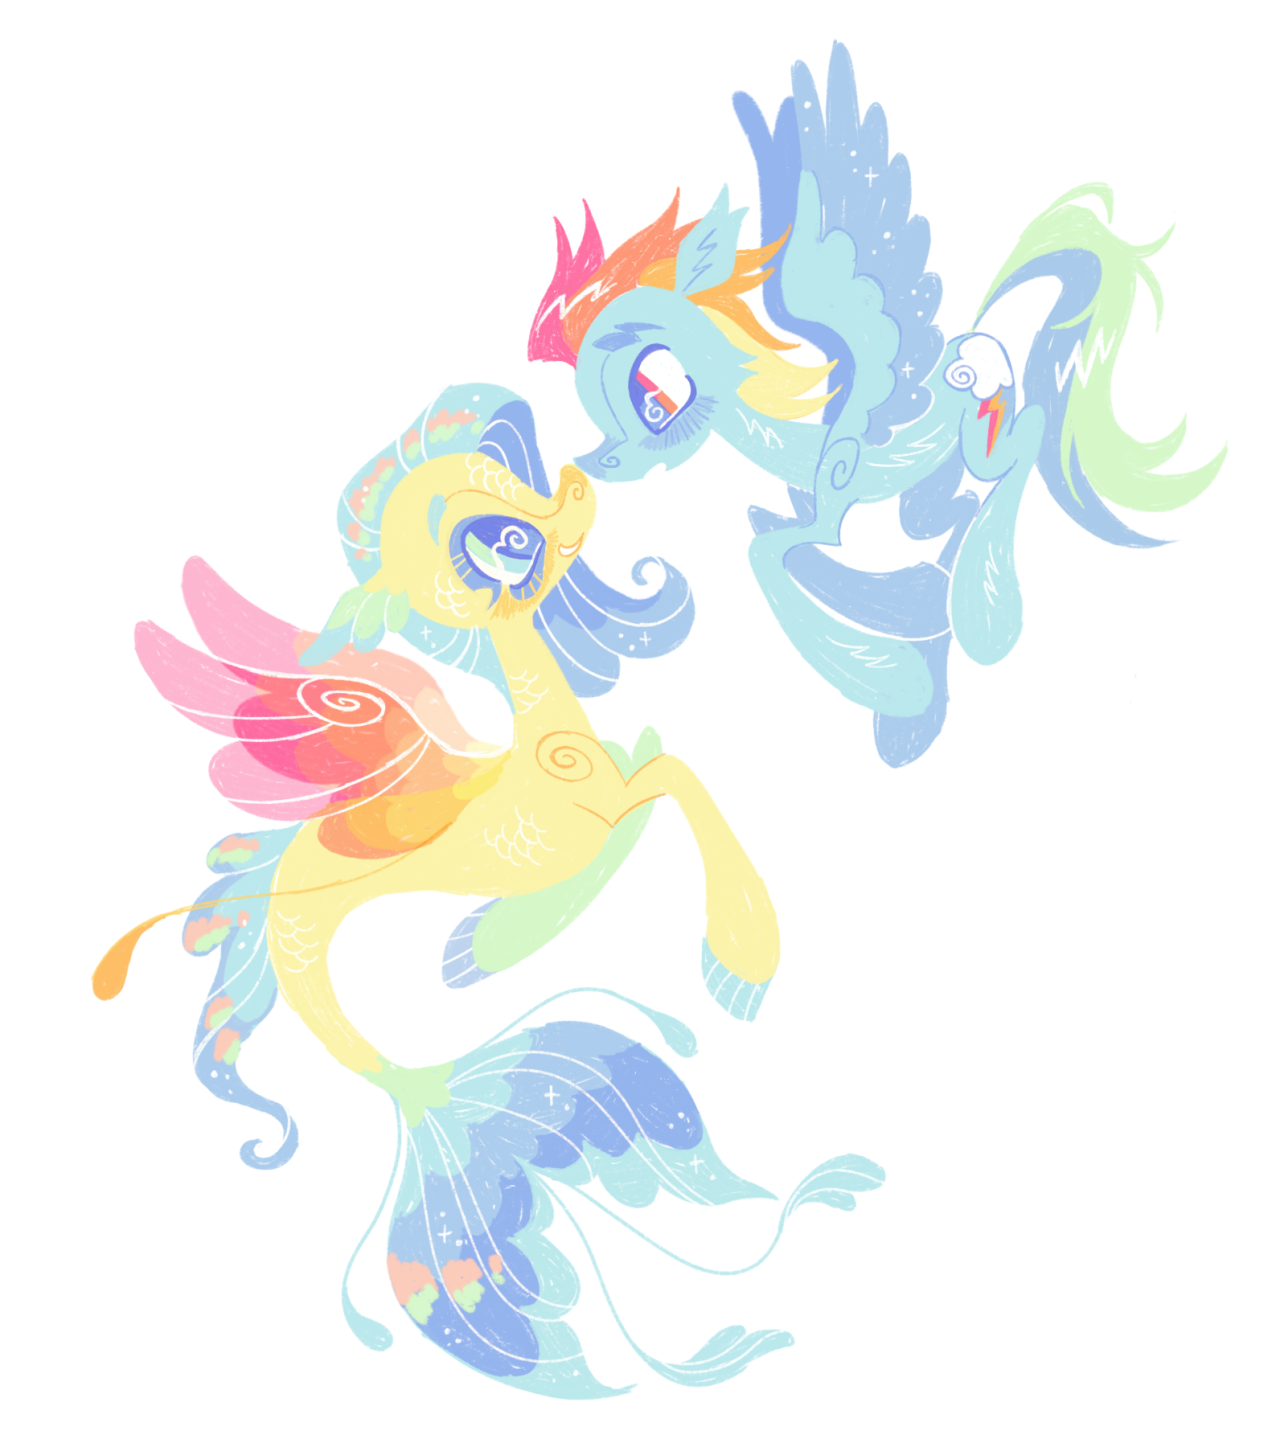 a drawing of skystar and rainbow dash from my little pony. slystar is a yellow sea pony with blue fins, and she is looking up to the right, touching rainbow's nose with her nose and smiling. rainbow is flying and looking down to the left with a surprised expression.